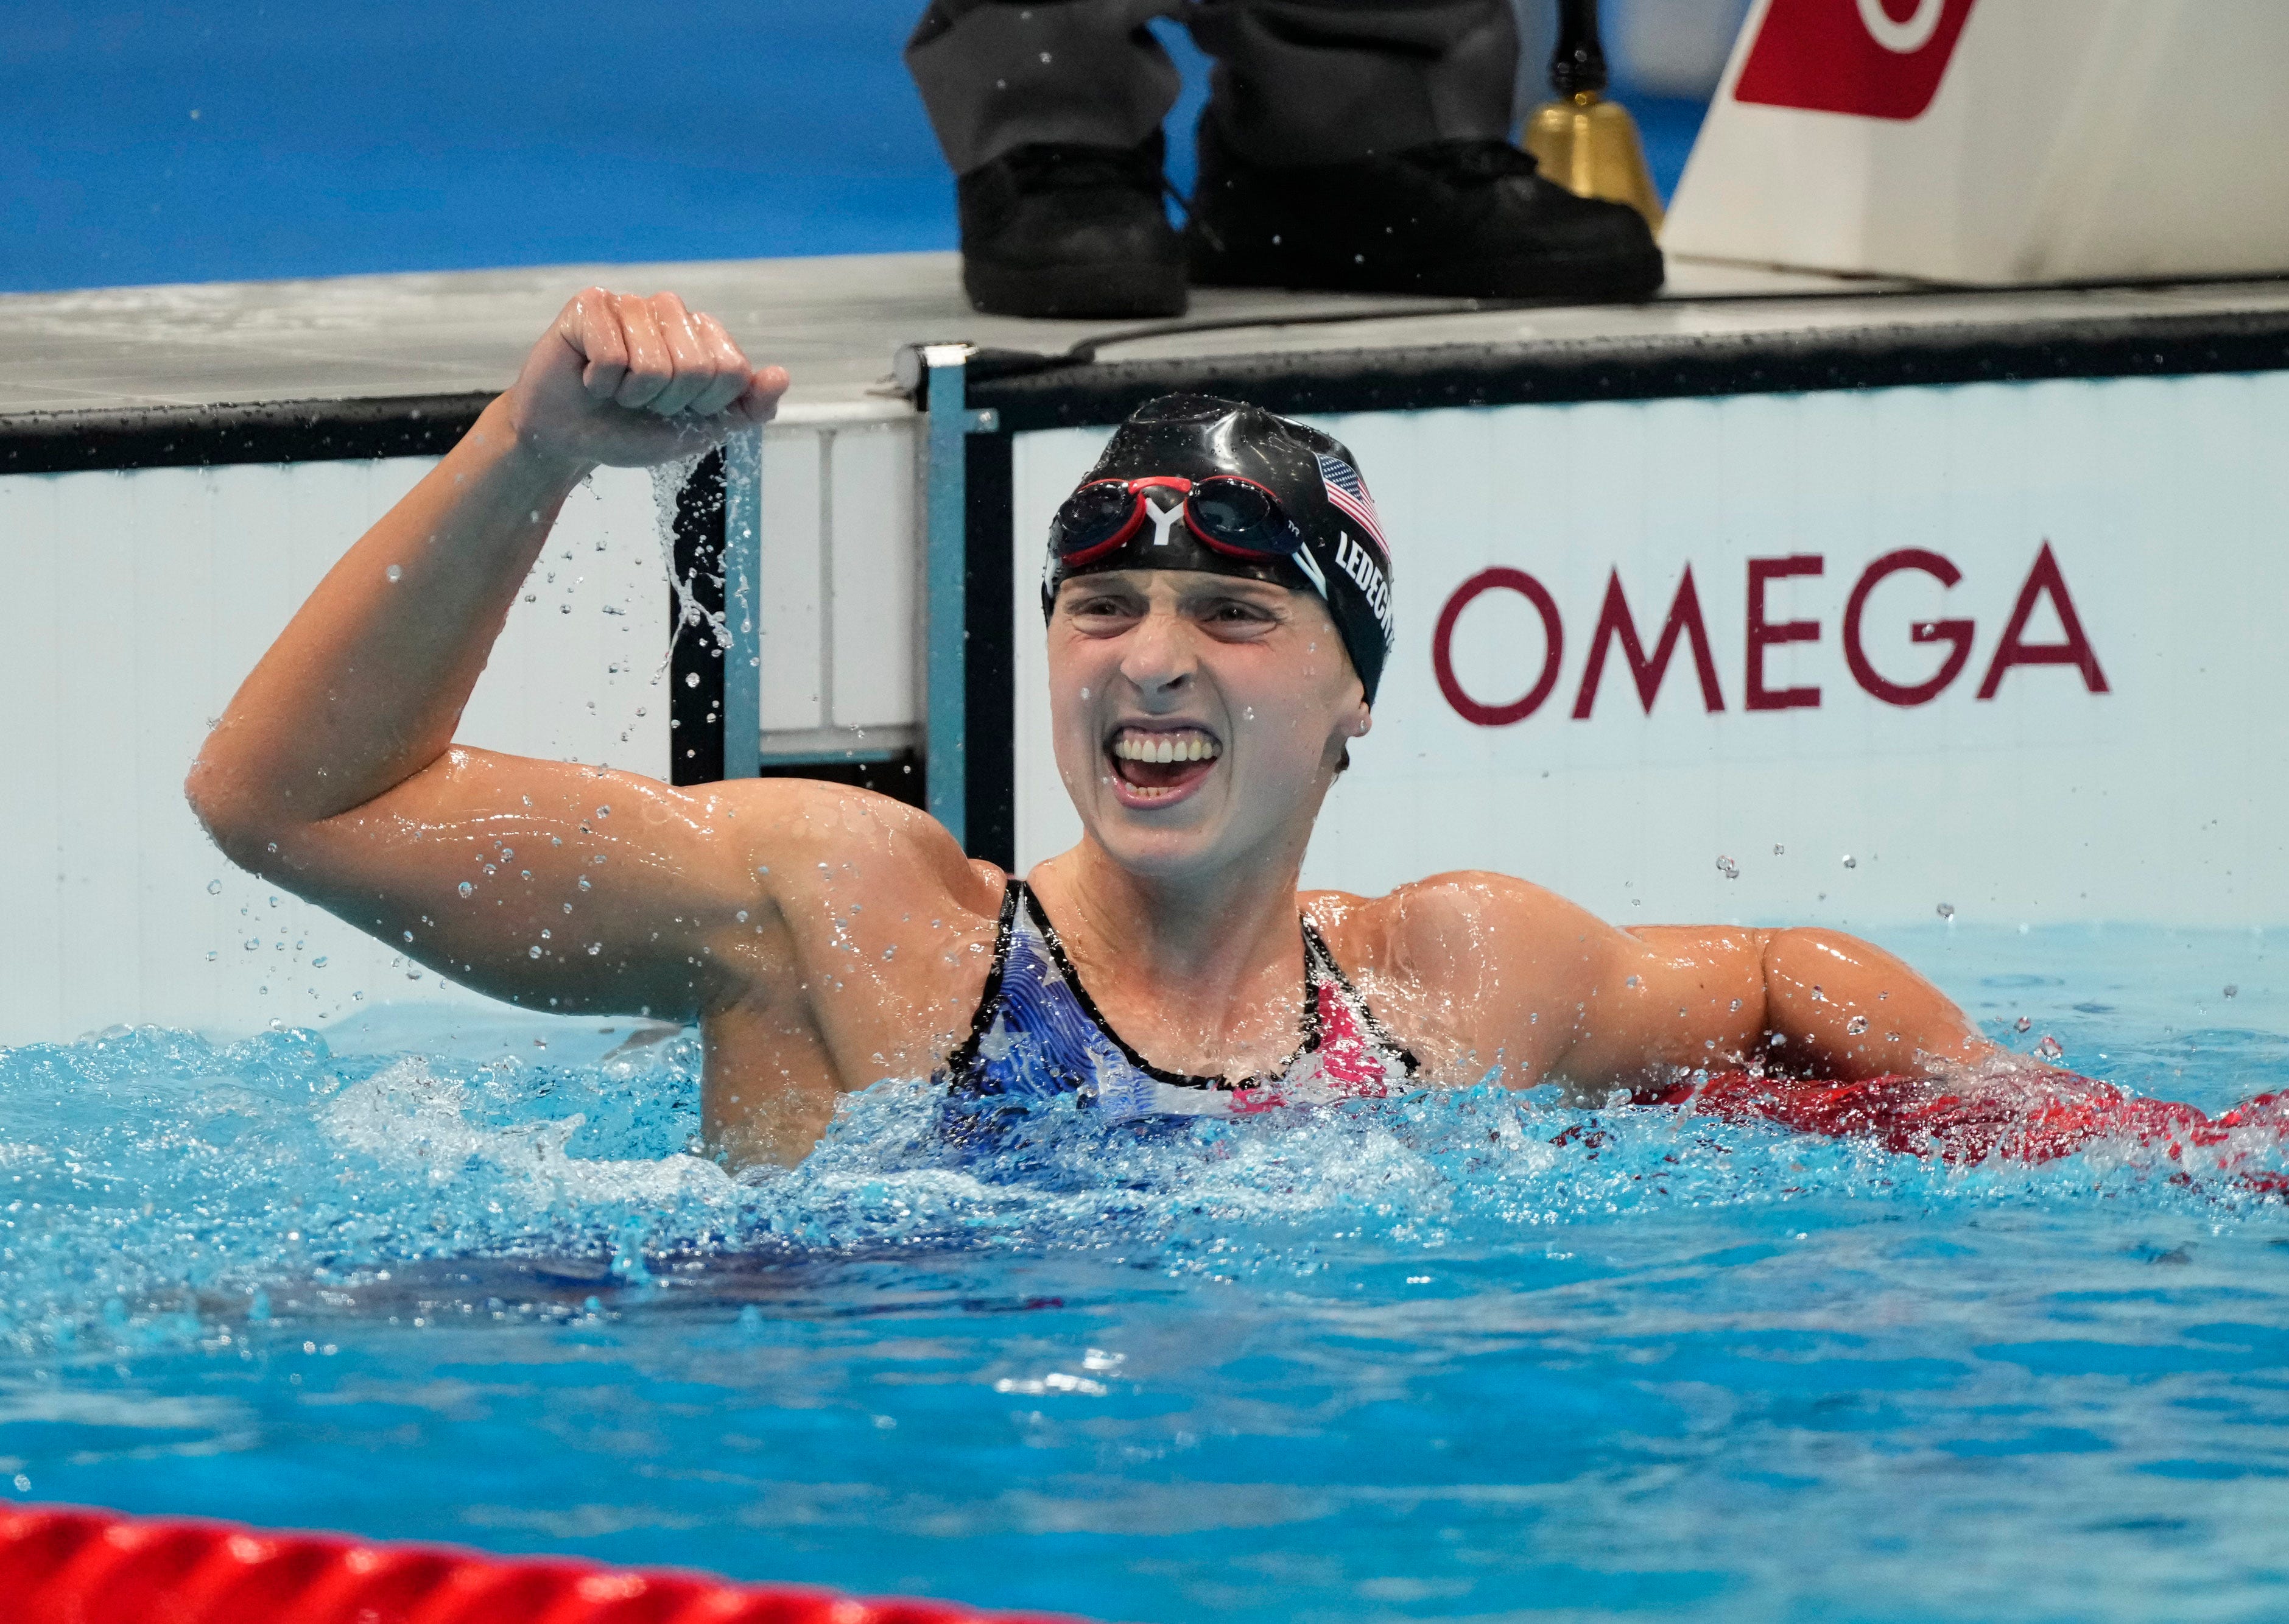 Katie Ledecky wins gold in 1500m freestyle at 2021 Tokyo Olympics